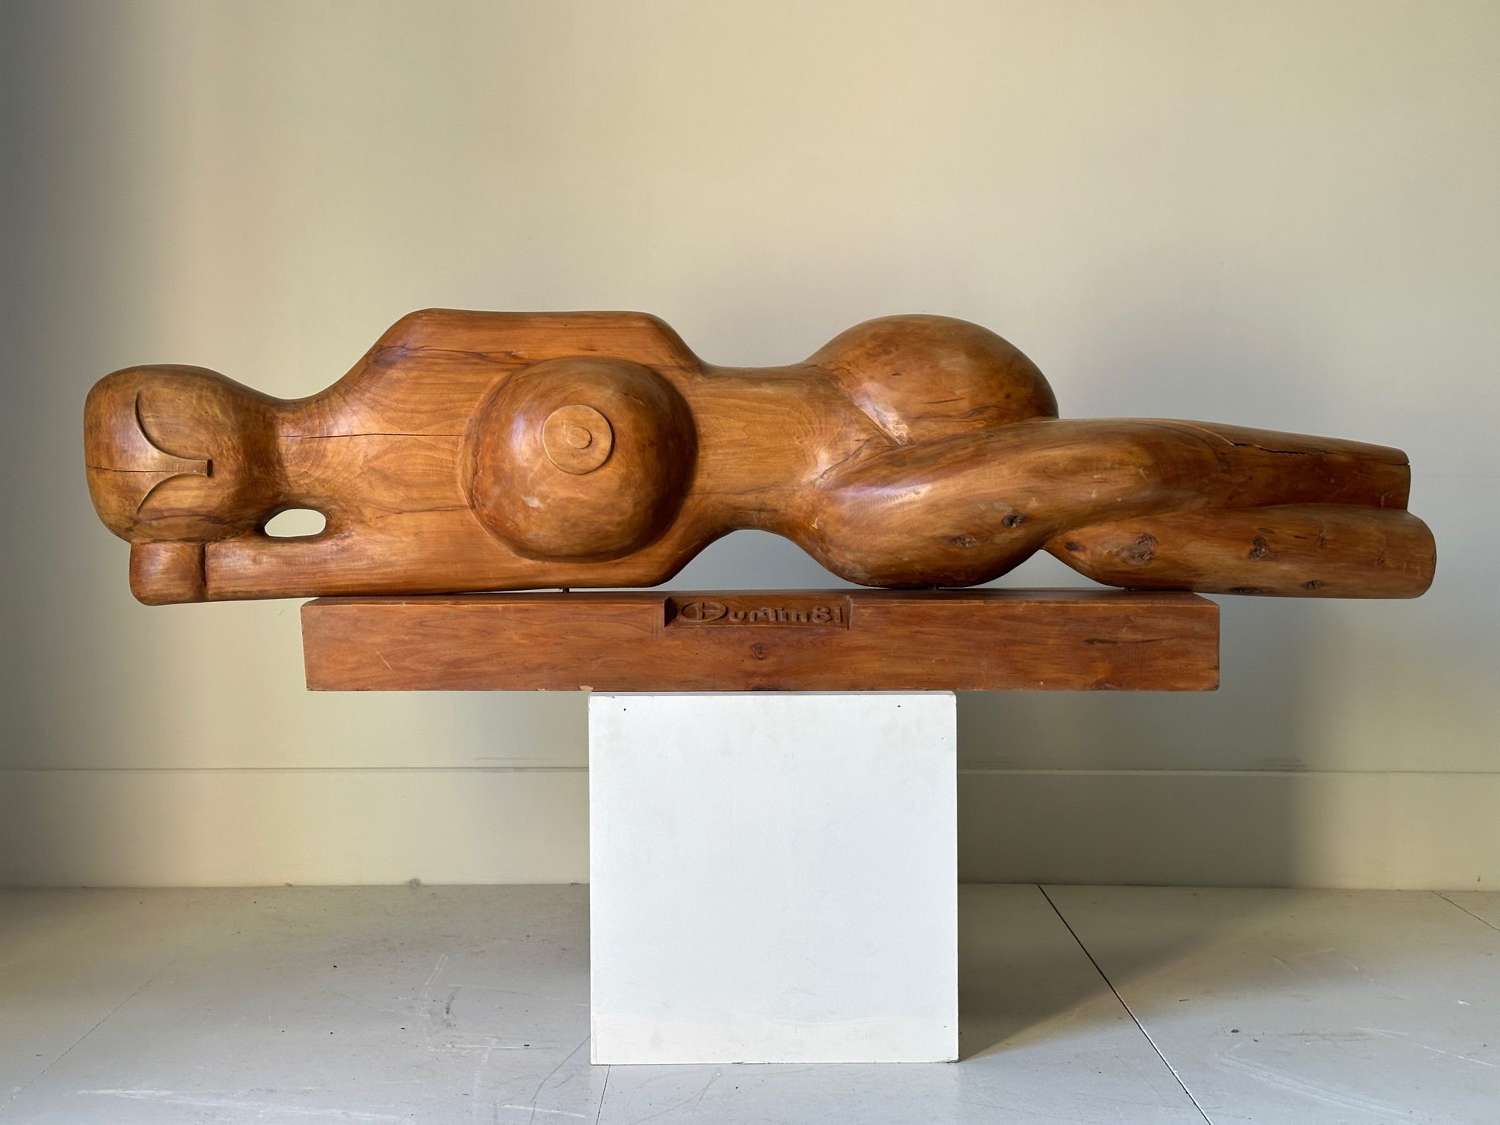 A Carved Wood Recumbent Sculpture of A Women 1981